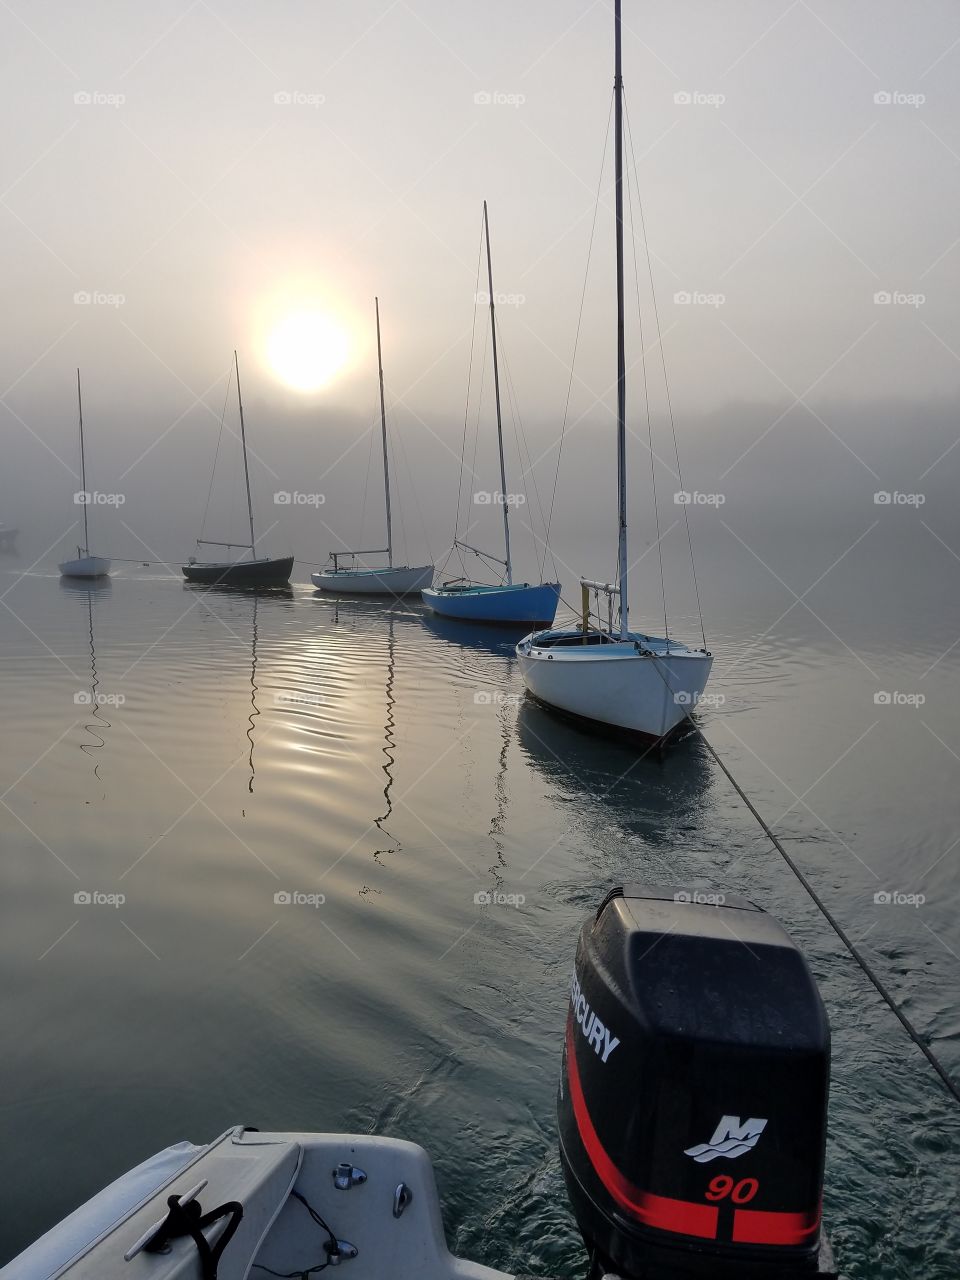 Towing Boats In The Fog